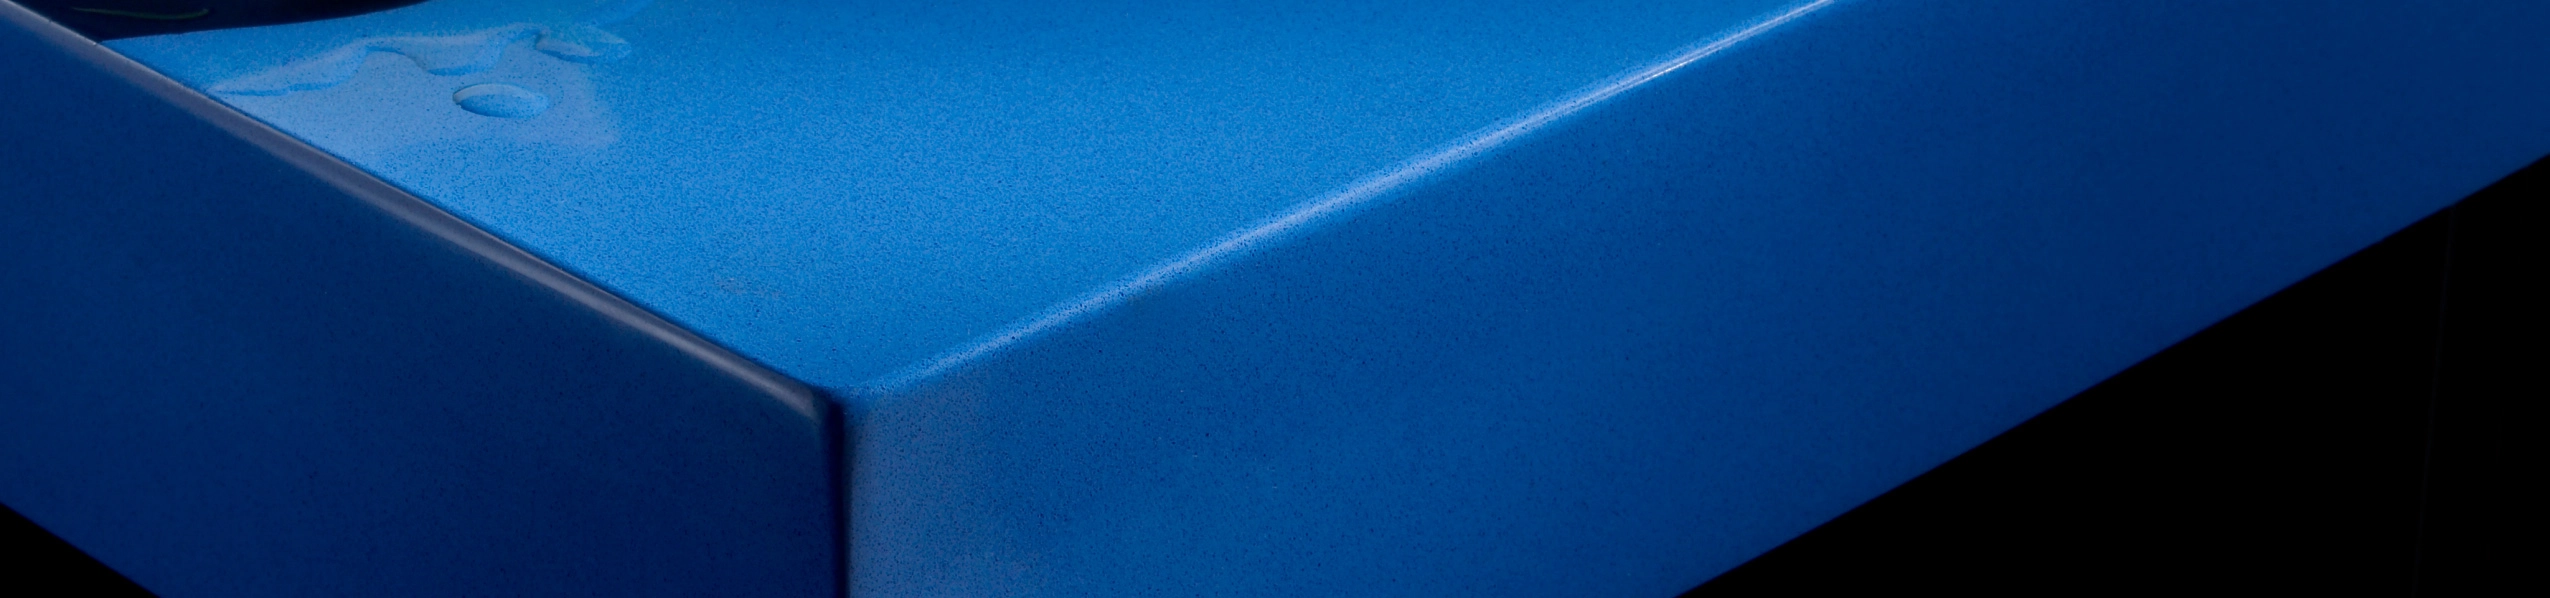 Image of RS1971 Azul Enjoy 2 Blue Enjoy usa Detail 1 1 in What is Silestone - Cosentino